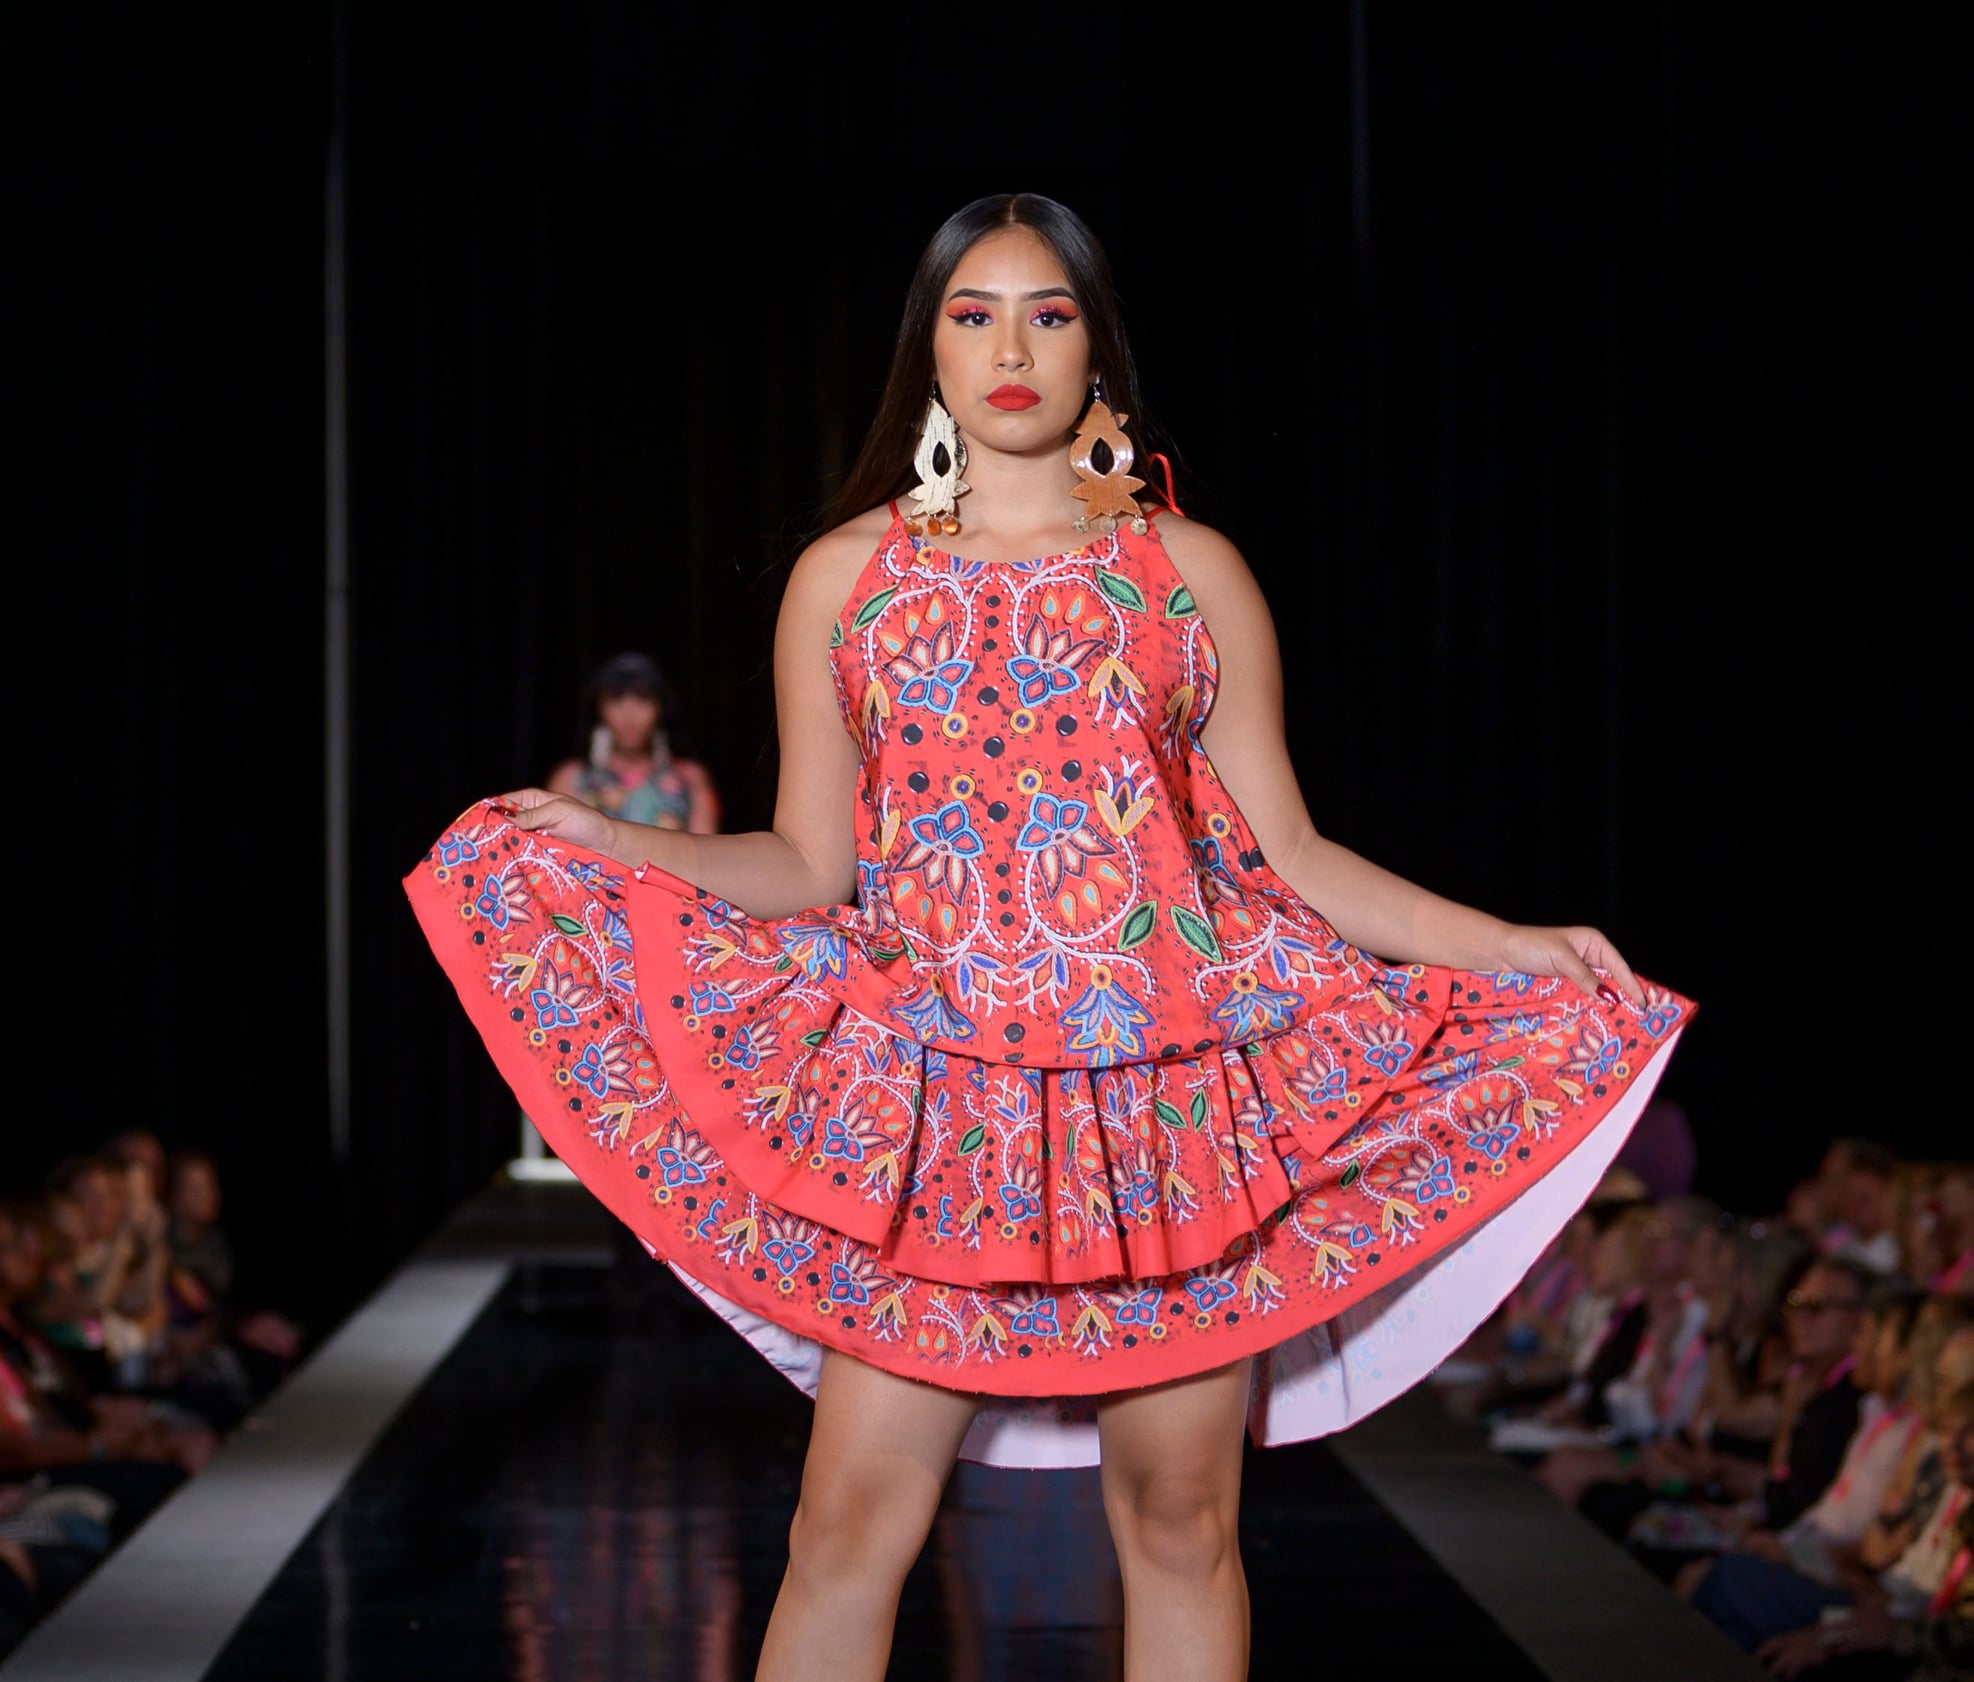 Clothing by Delina White of I Am Anishinaabe will be featured at the Native Visions Fashion Show on Tuesday, Sept. 14, at The Lynhall in Minneapolis, Minnesota. (Photo/Jason S. Ordaz)